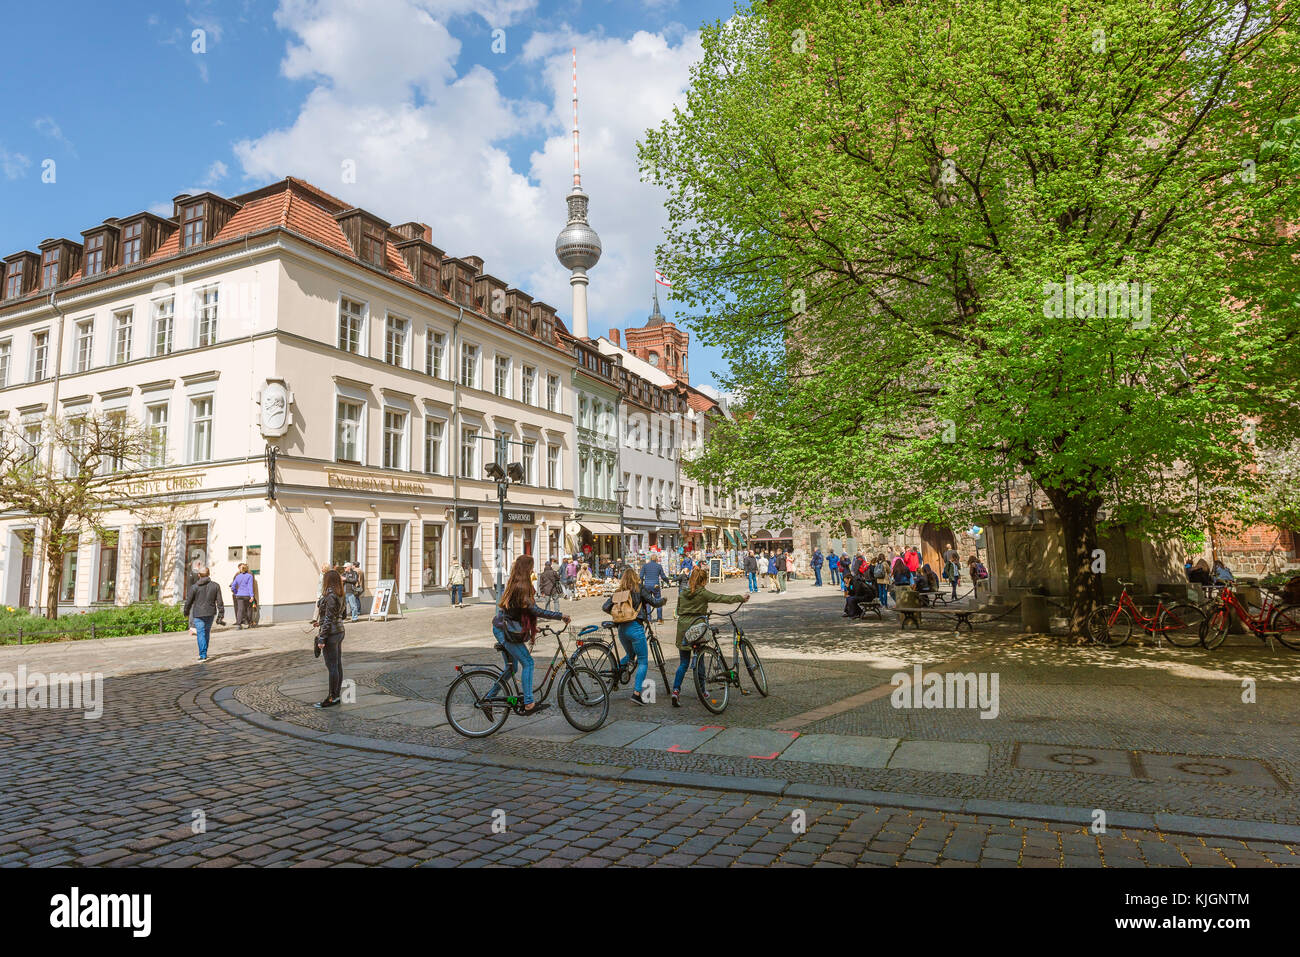 Berlin center, the Nikolaiviertel area in Berlin is a reconstruction of the original historic old town centre that was destroyed in 1944, Germany Stock Photo